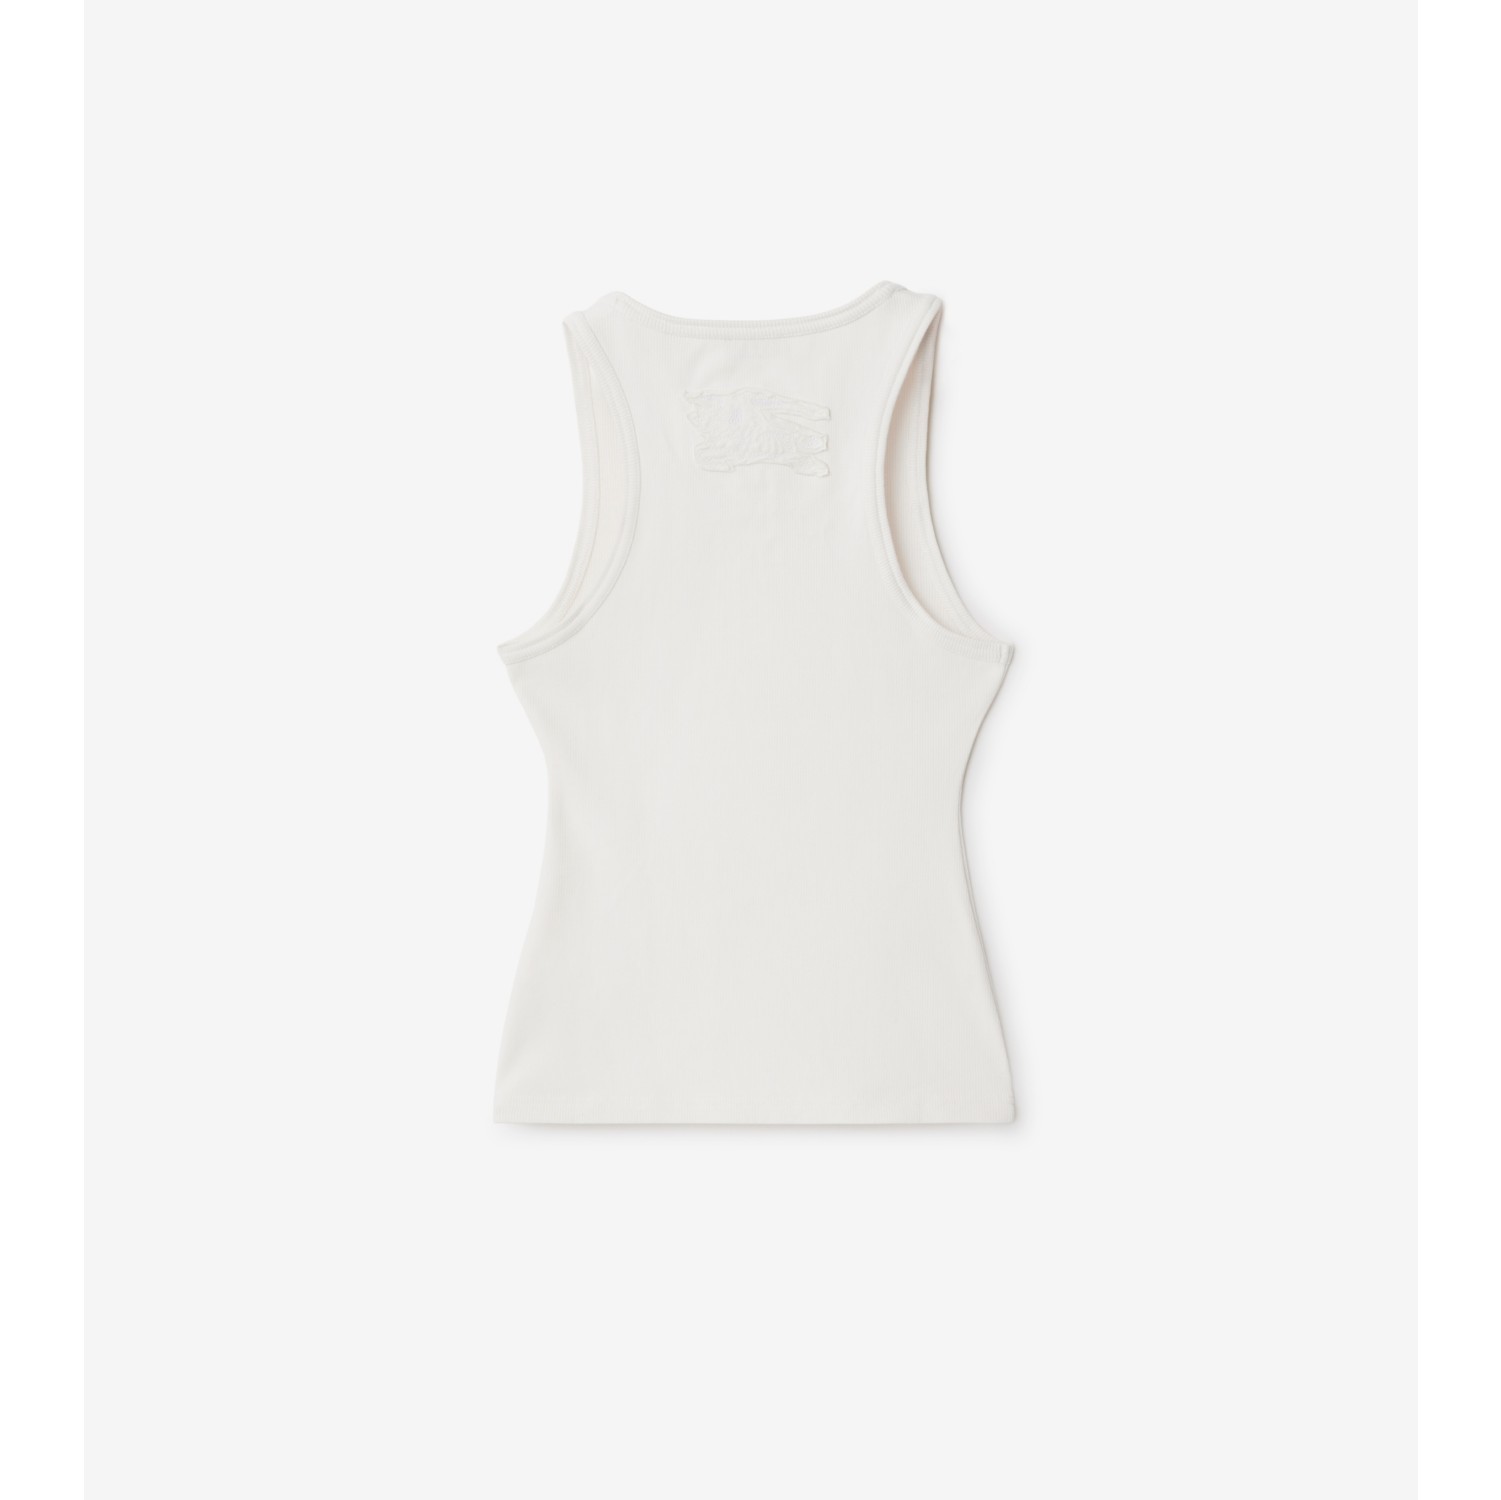  Other Stories cotton lace trim tank top in off white